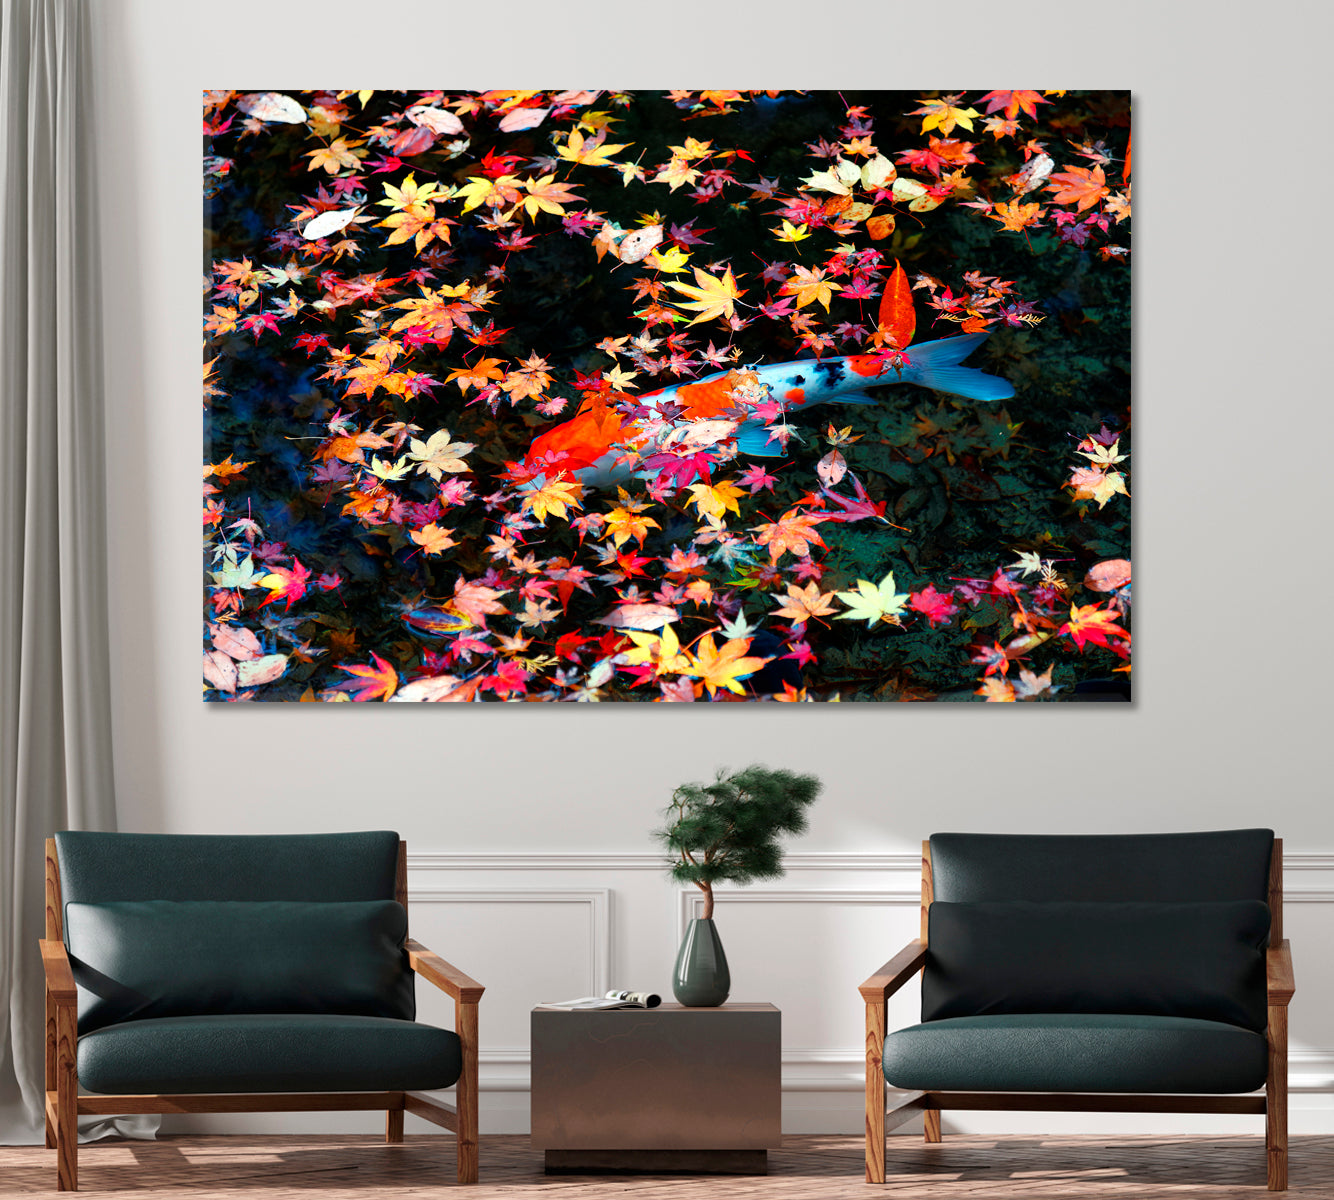 Koi Fish Fancy Carp in Pond with Maple Leaves Canvas Print-Canvas Print-CetArt-1 Panel-24x16 inches-CetArt